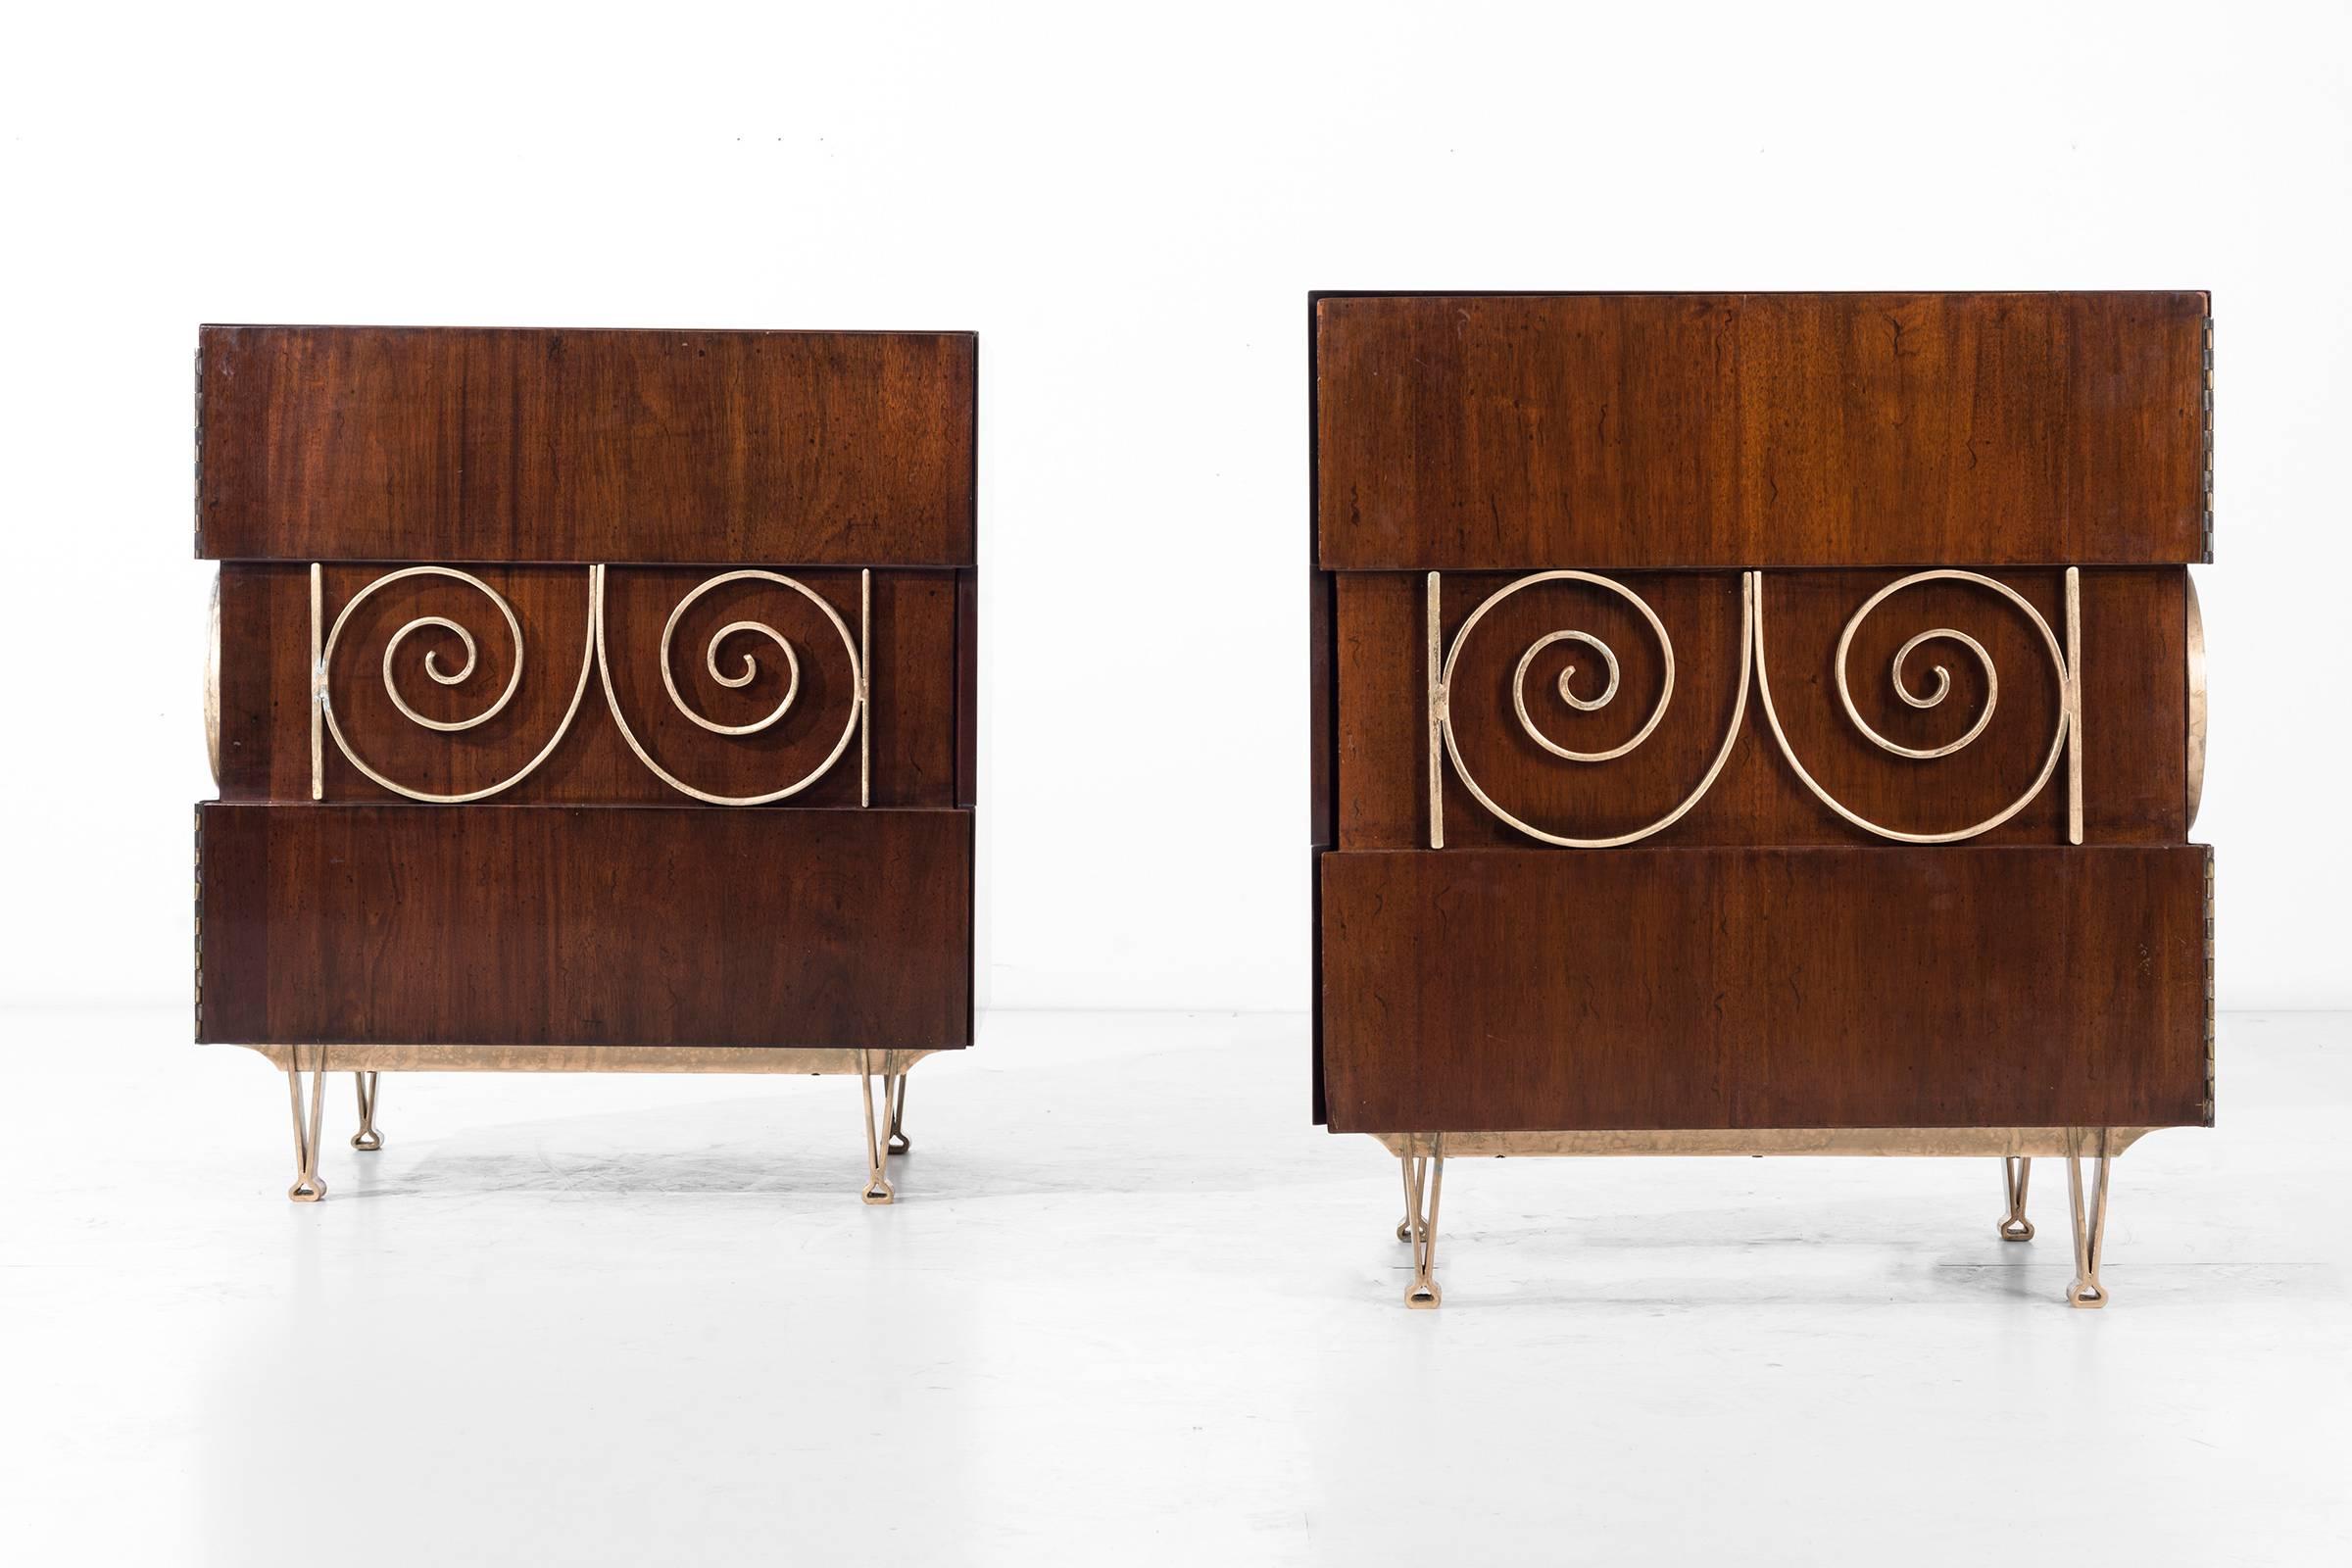 These end tables are covered in brass plated ornamentation, supported by brass V-shaped legs; the wood is mahogany and walnut fused together.